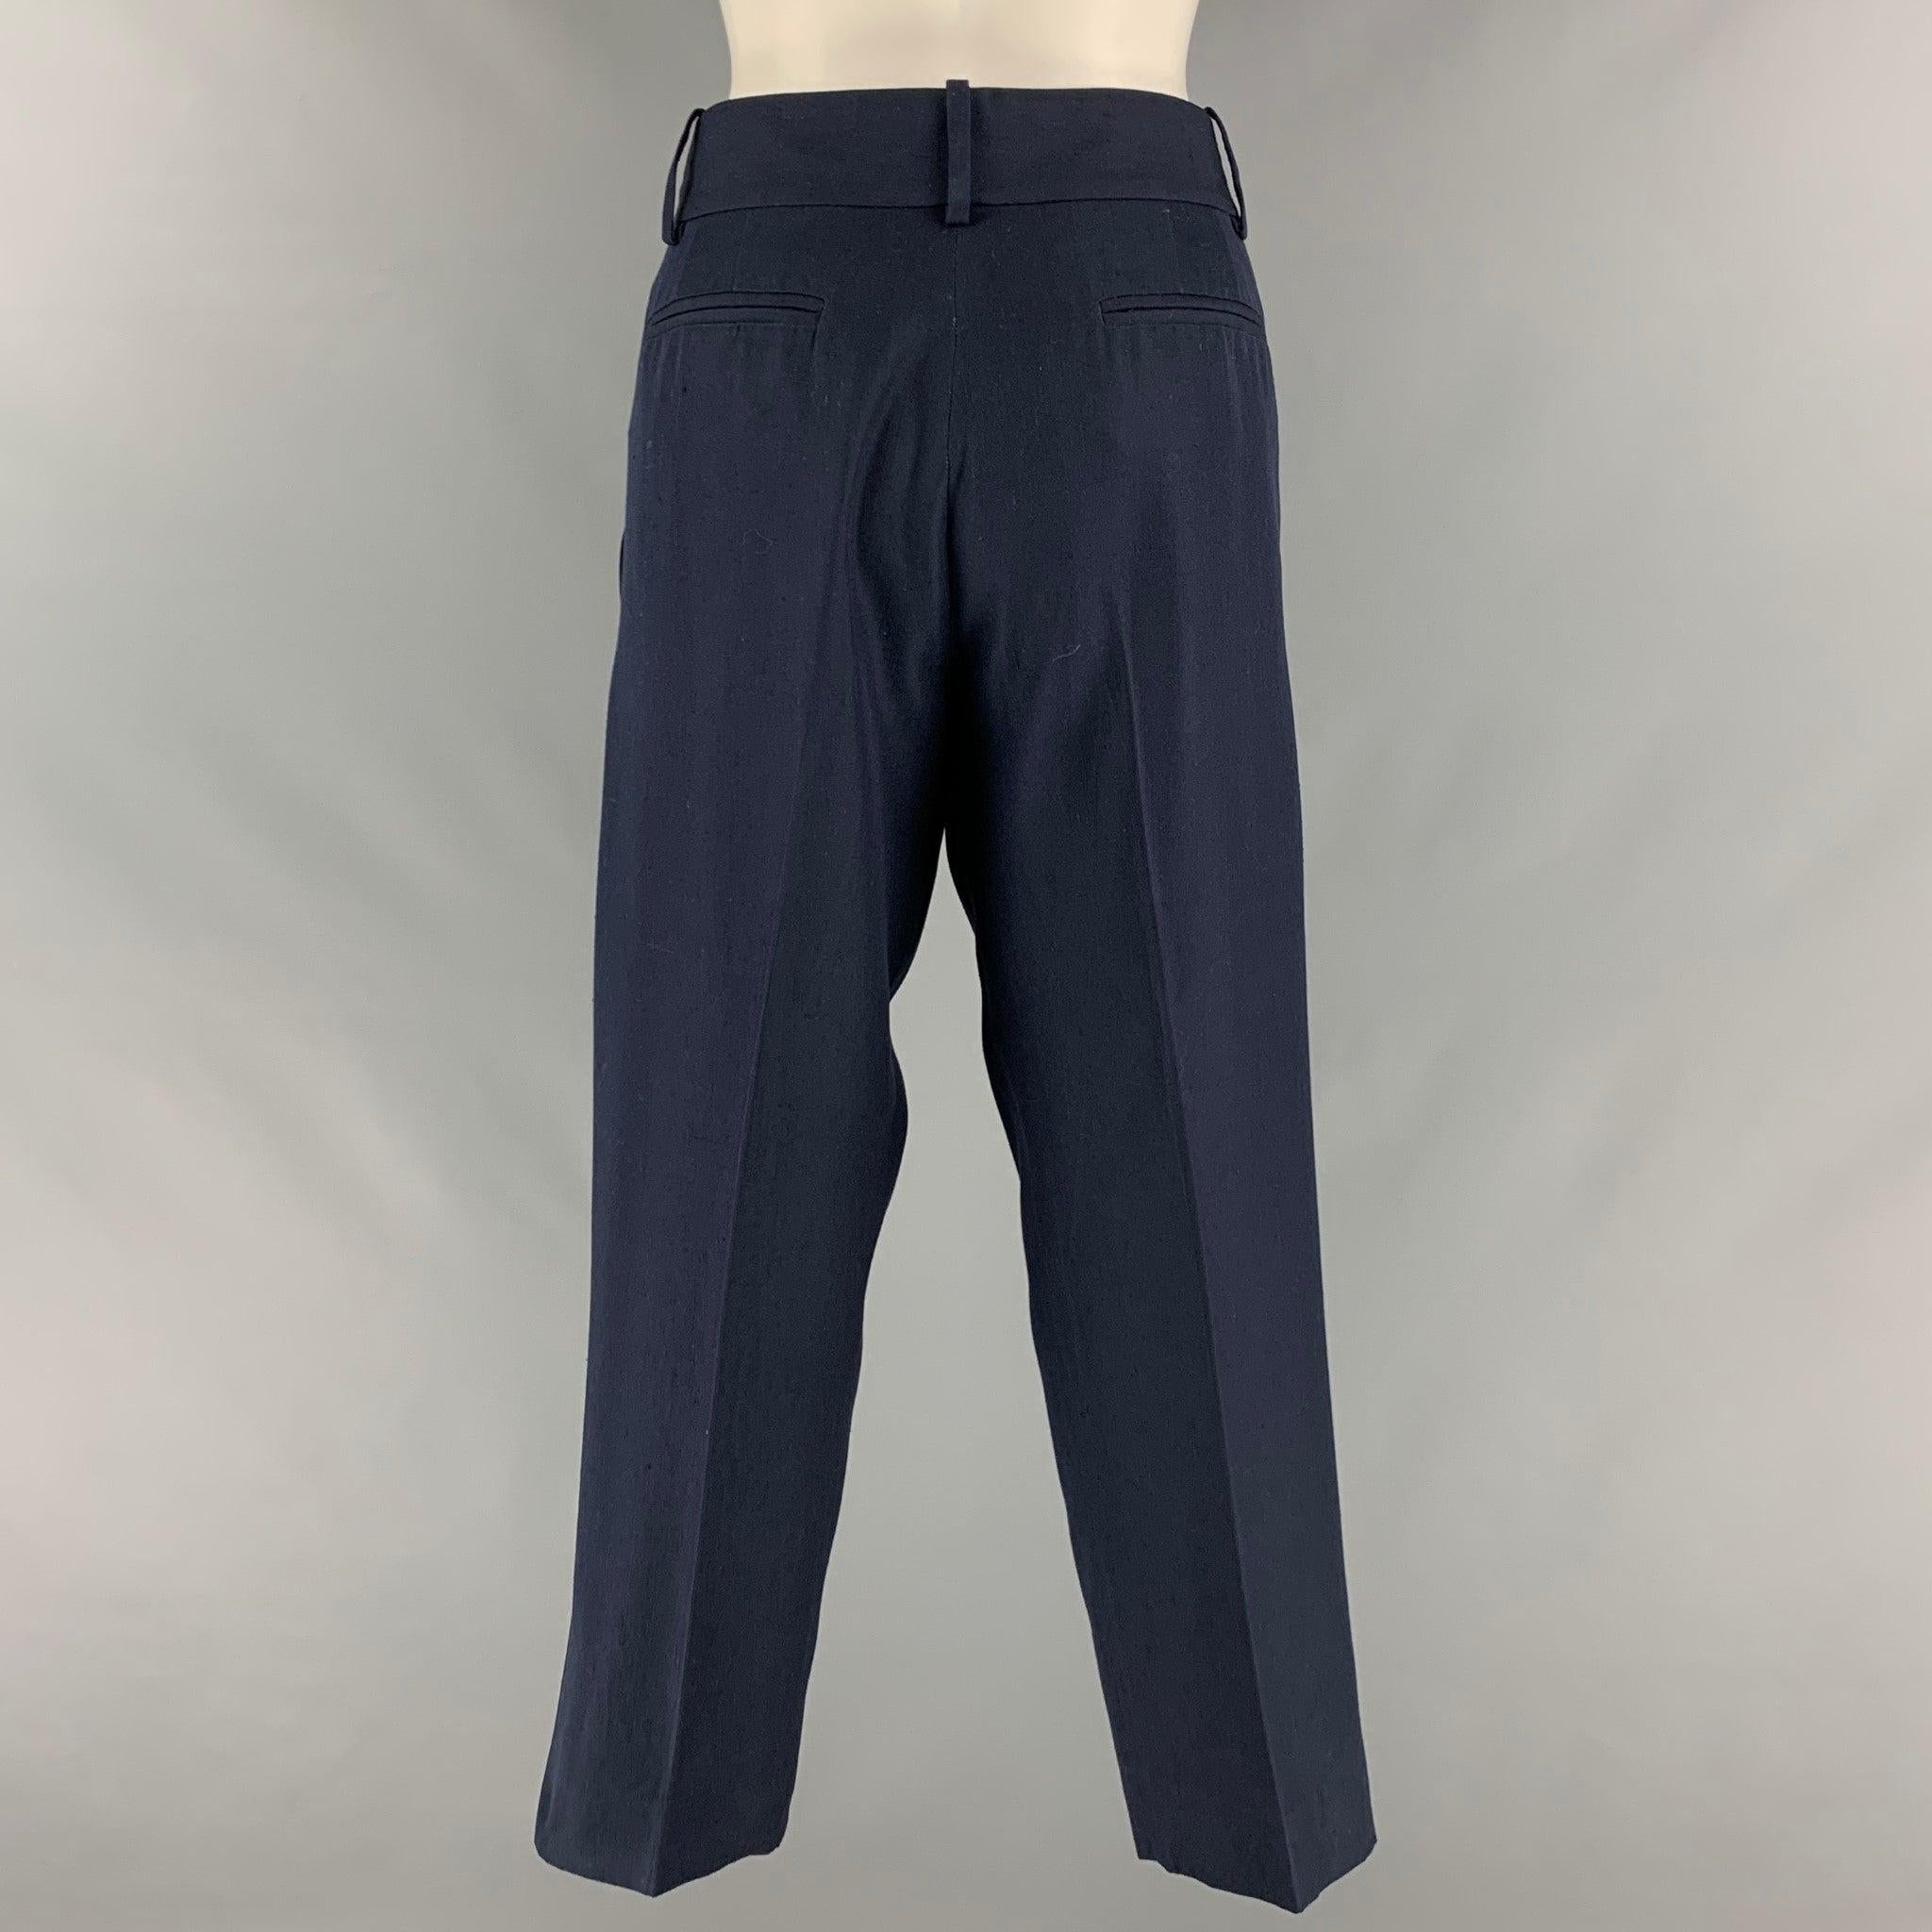 MARC JACOBS Size 8 Navy Silk Cropped Dress Pants In Good Condition For Sale In San Francisco, CA